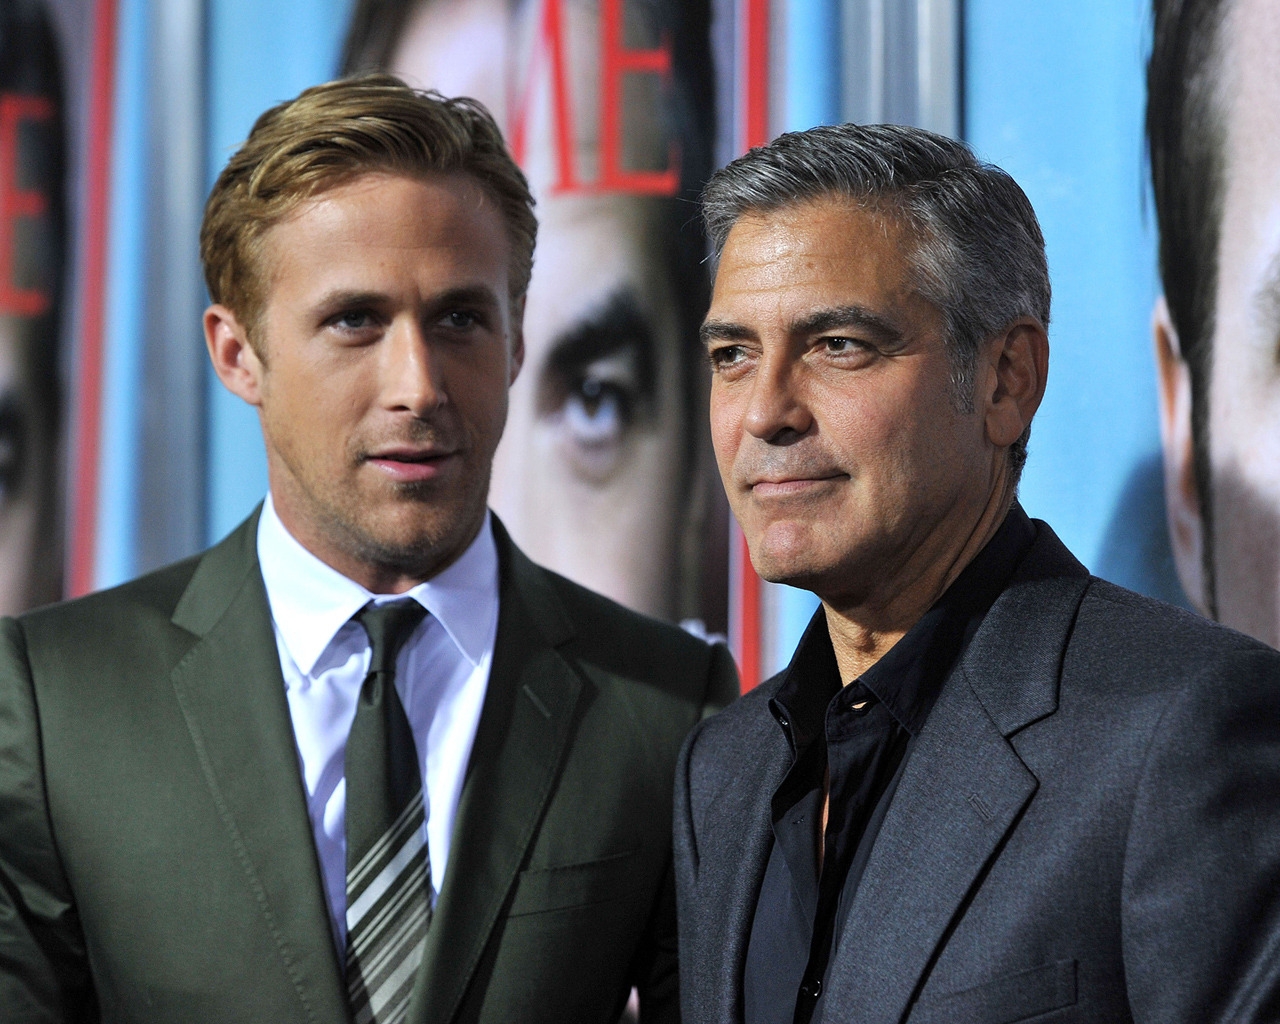 George Clooney and Ryan Gosling for 1280 x 1024 resolution